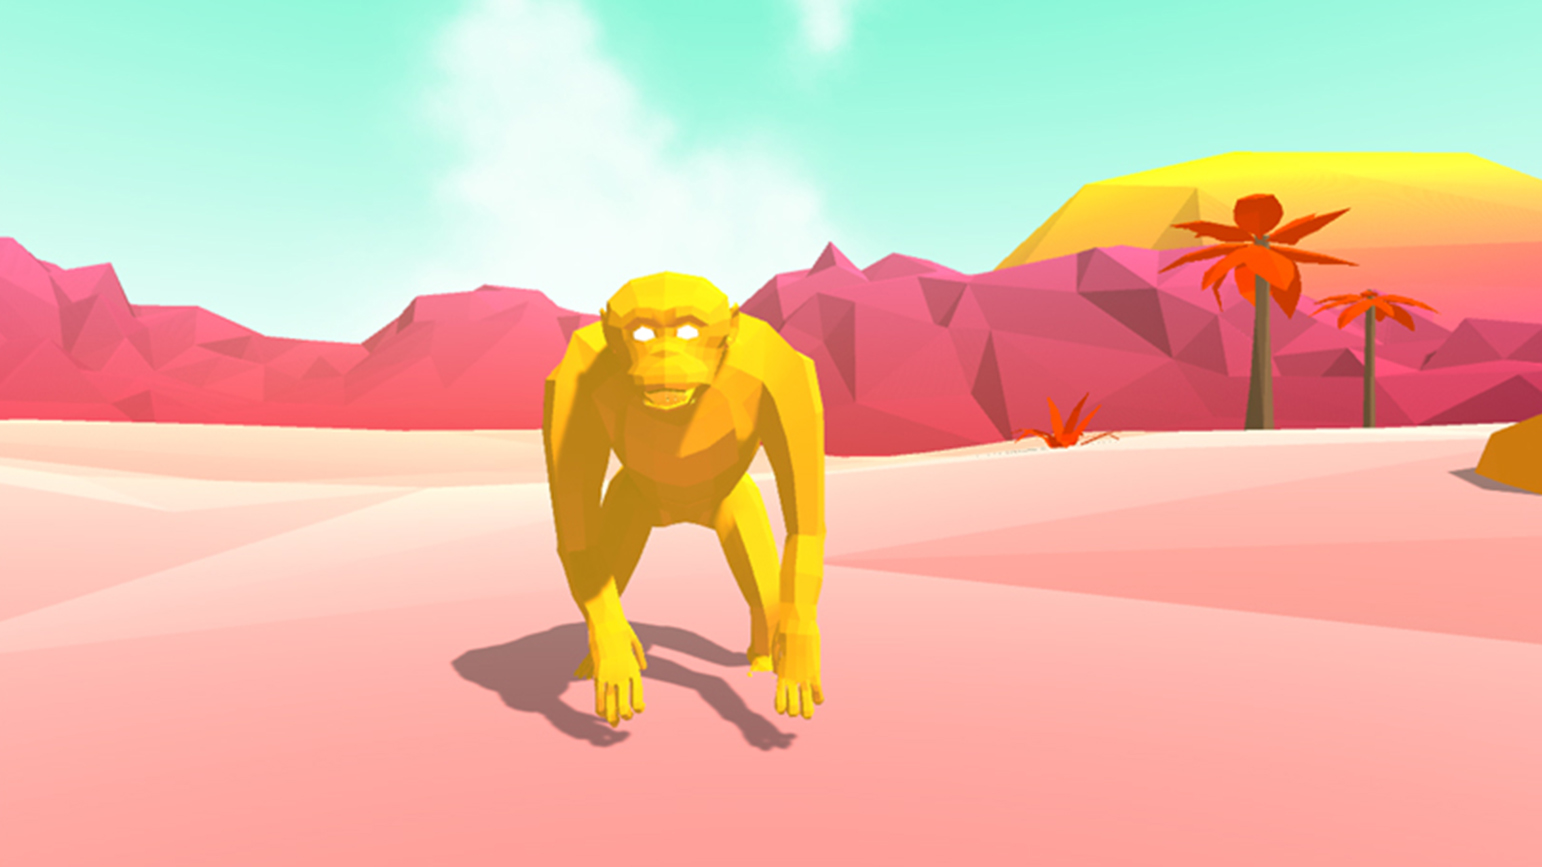 Still from a video game showing a yellow gorilla